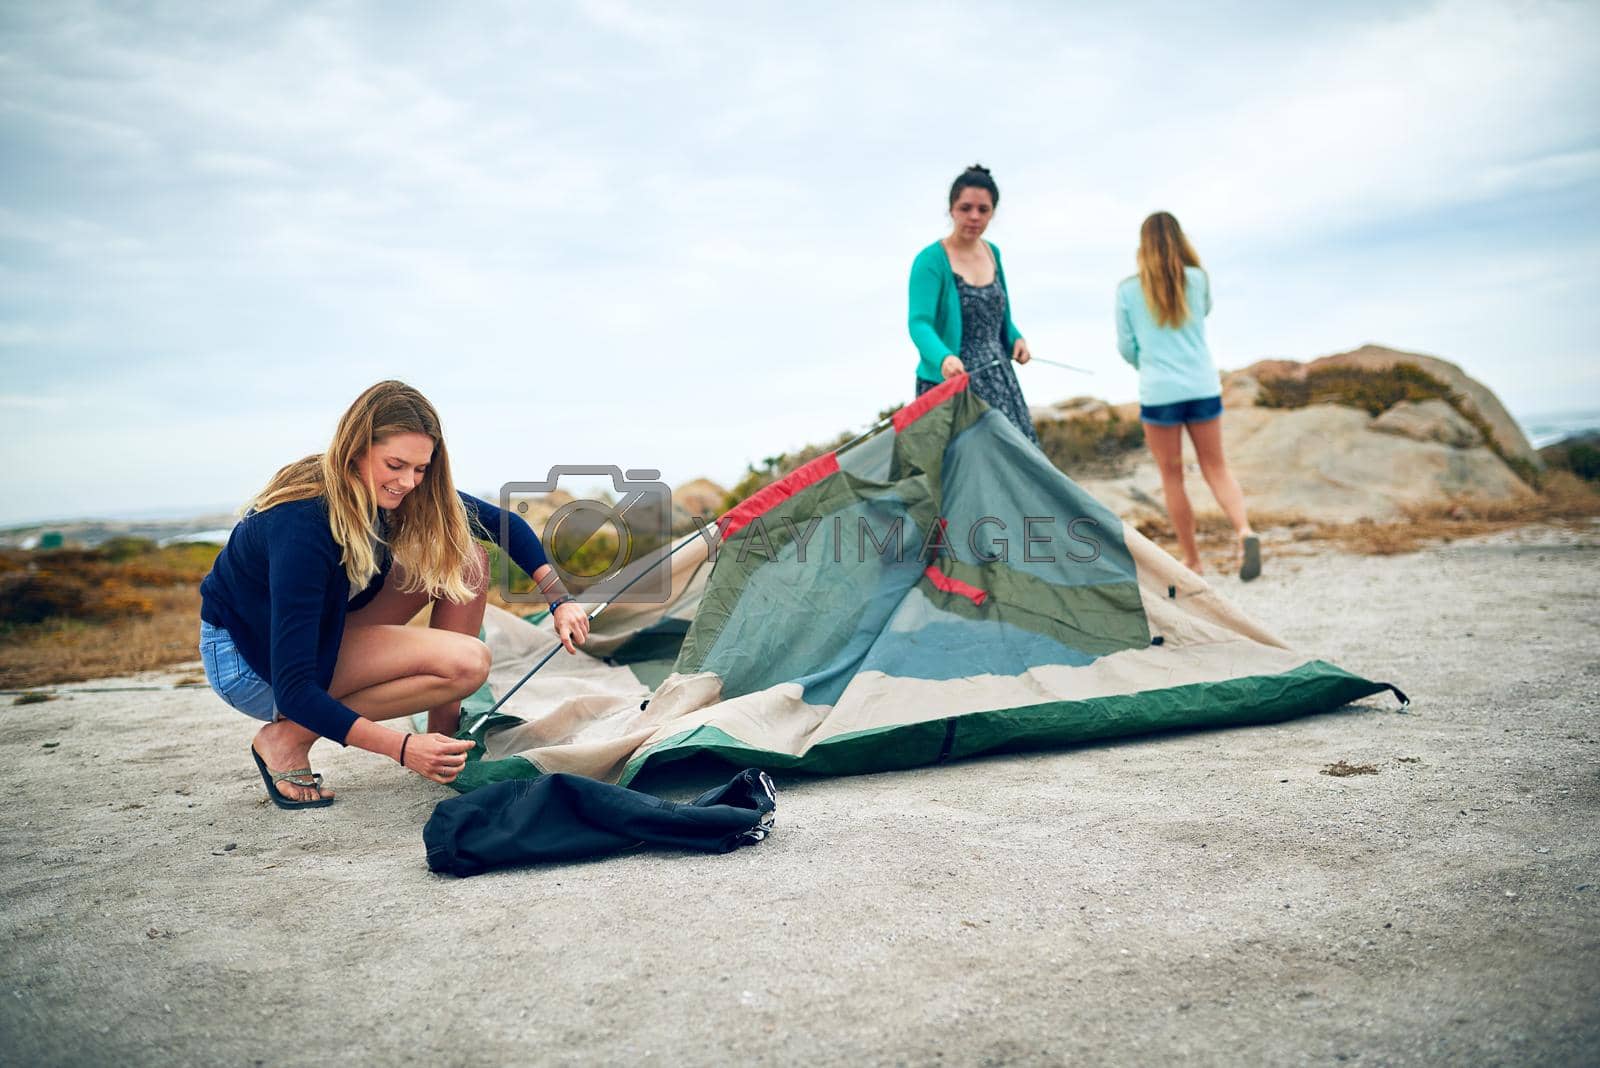 Shot of a group of female friends setting up a tent outdoors.